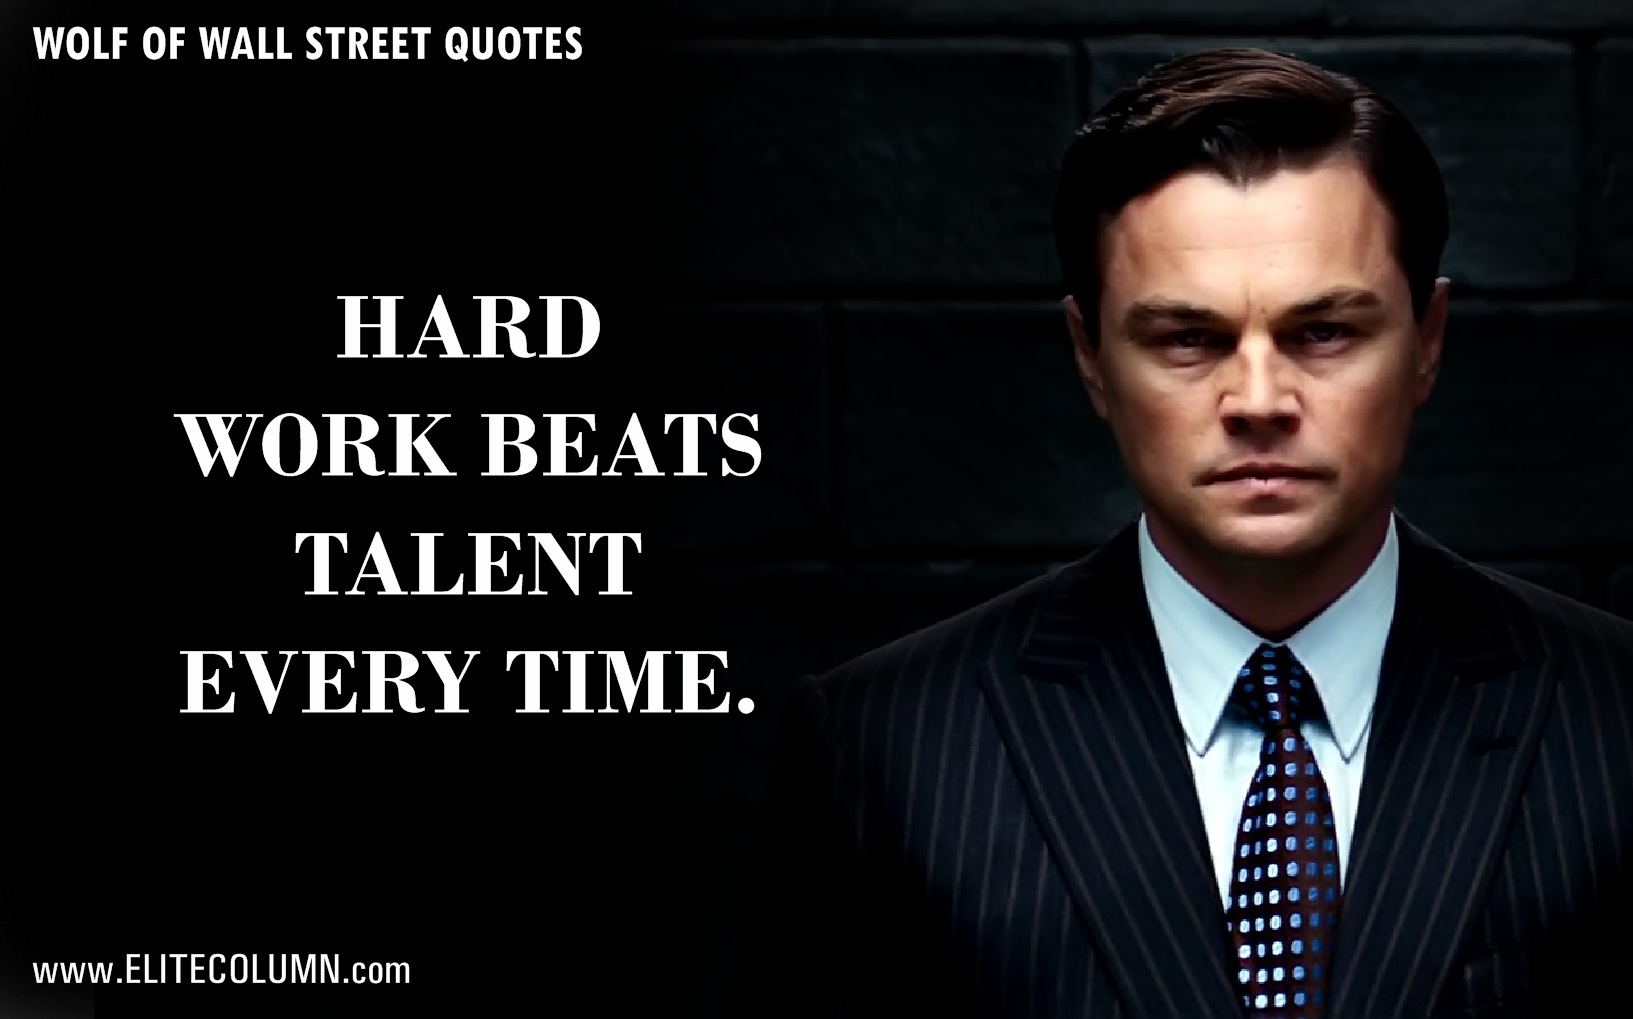 The Wolf Of Wall Street Quotes (6)